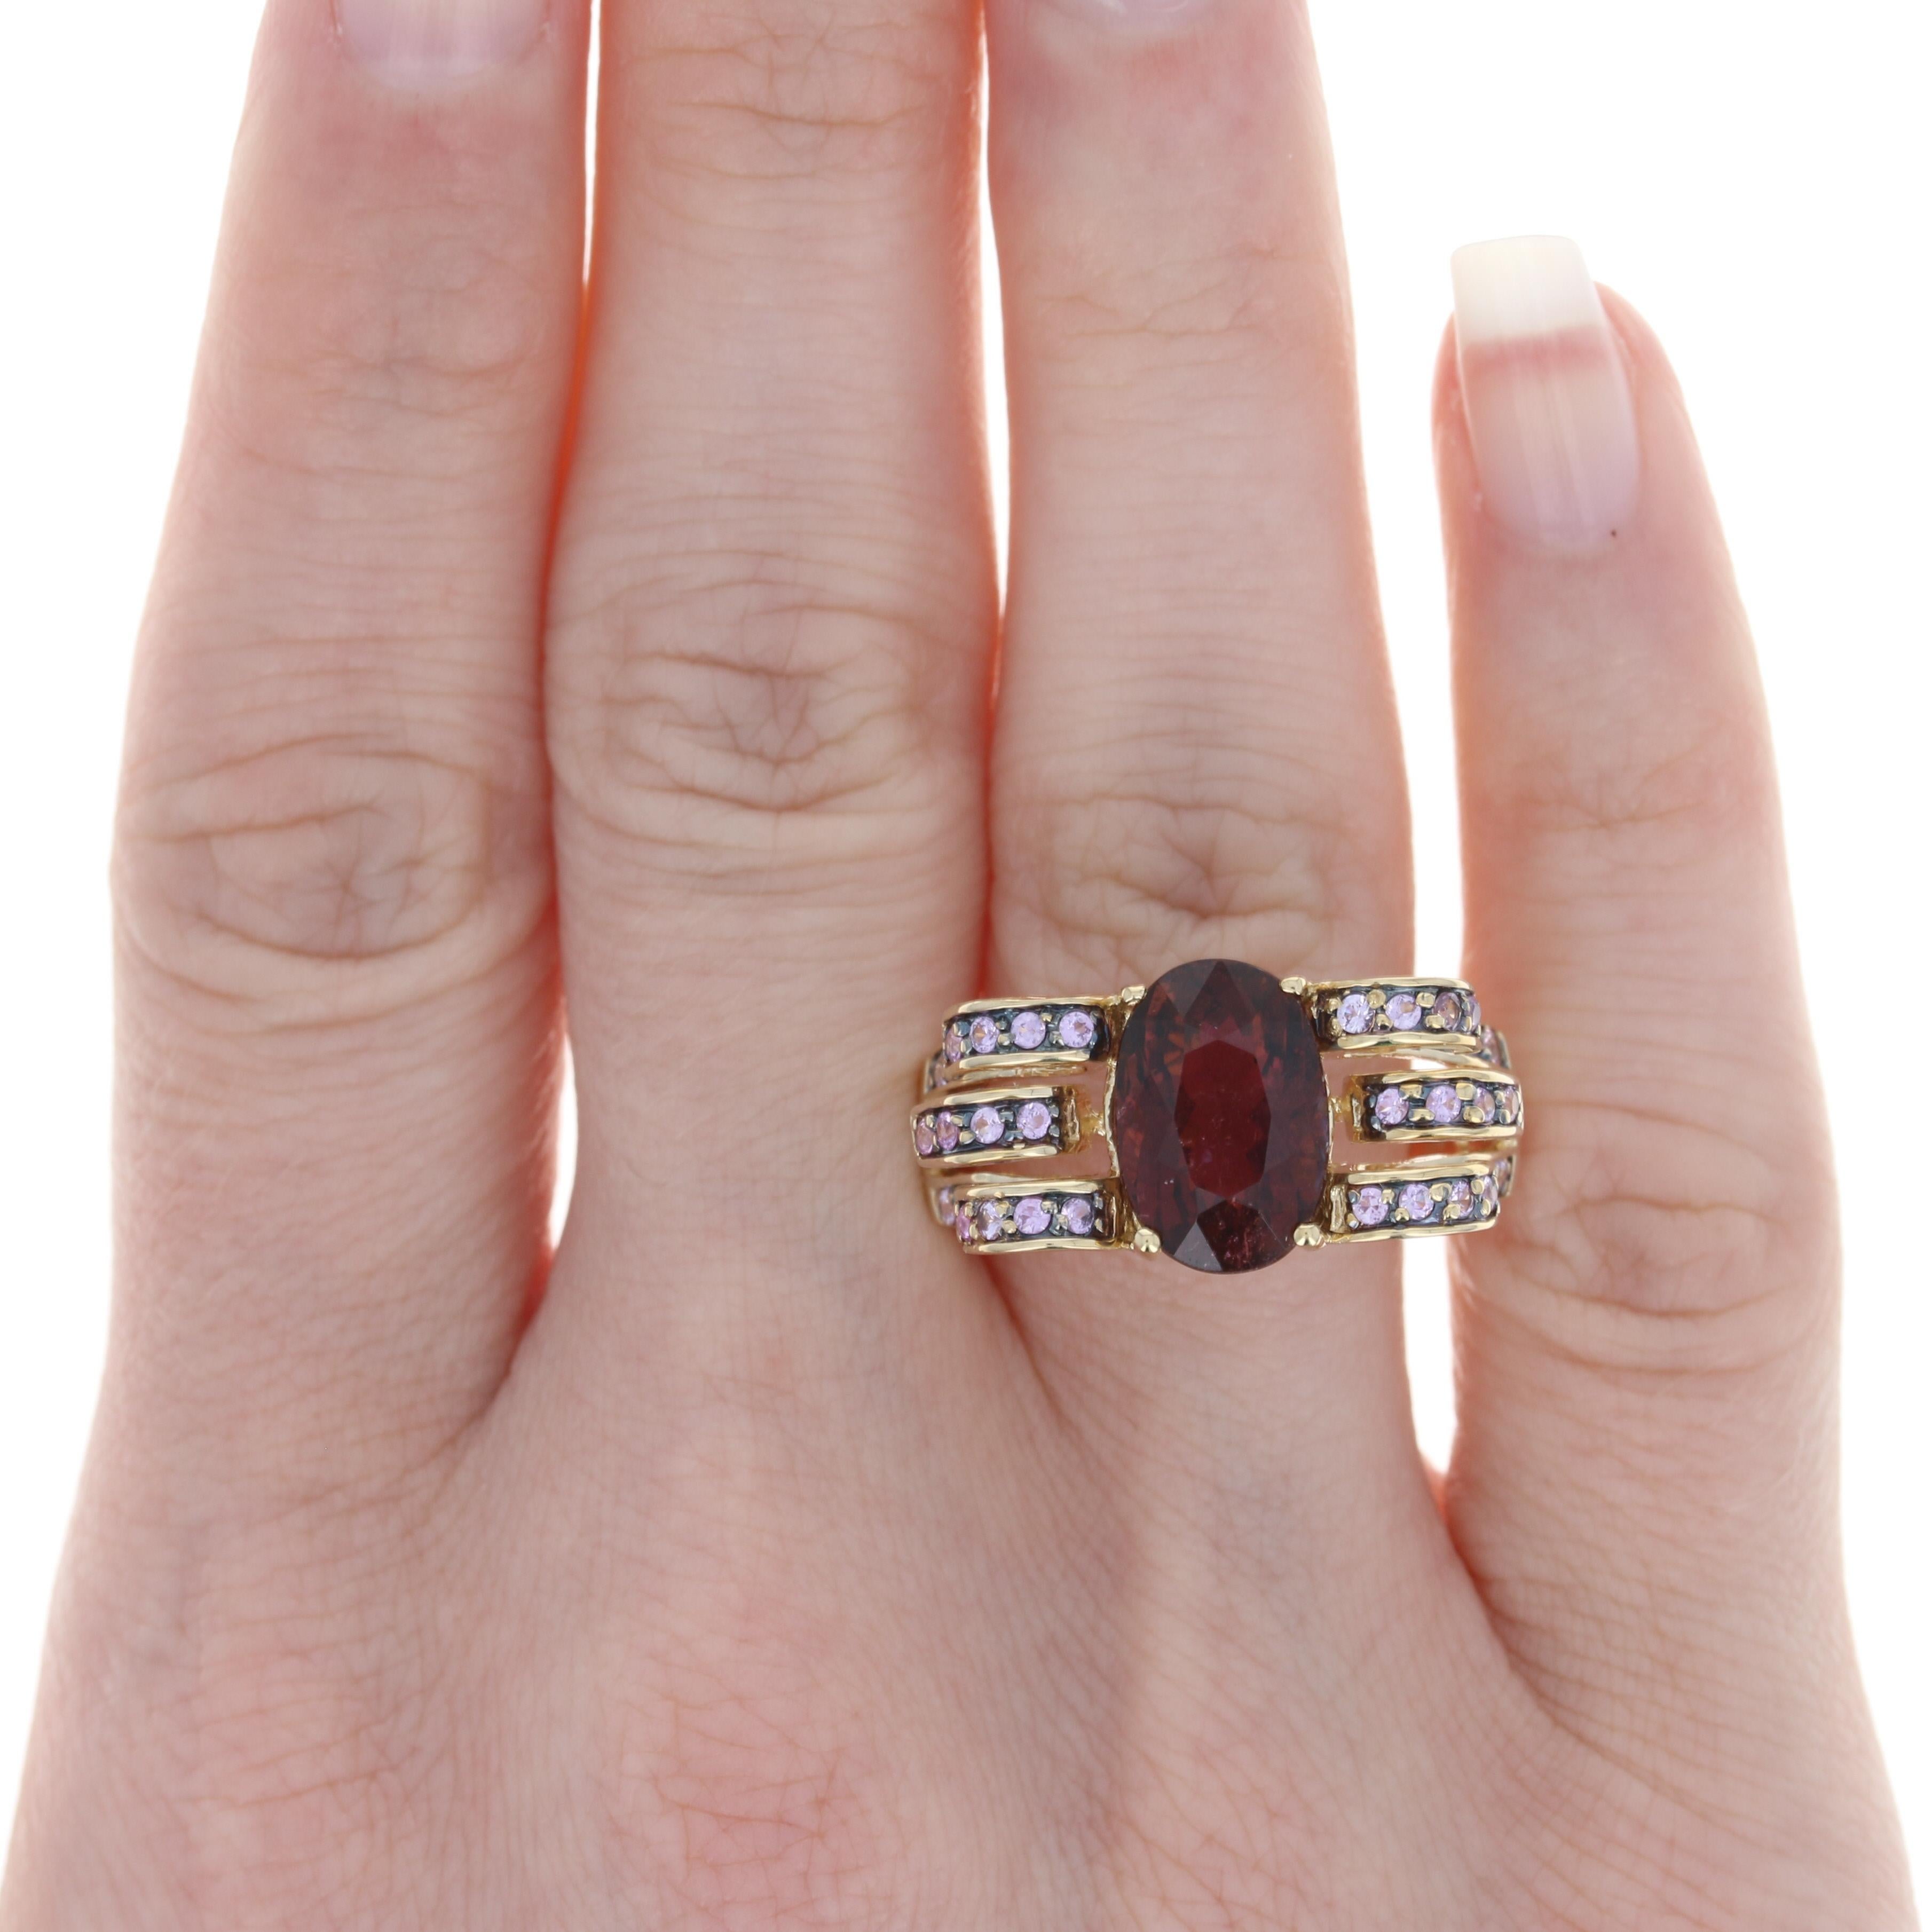 Oval Cut Le Vian Rubellite Tourmaline & Pink Sapphire Ring Yellow Gold, 14k Oval 6.06ctw